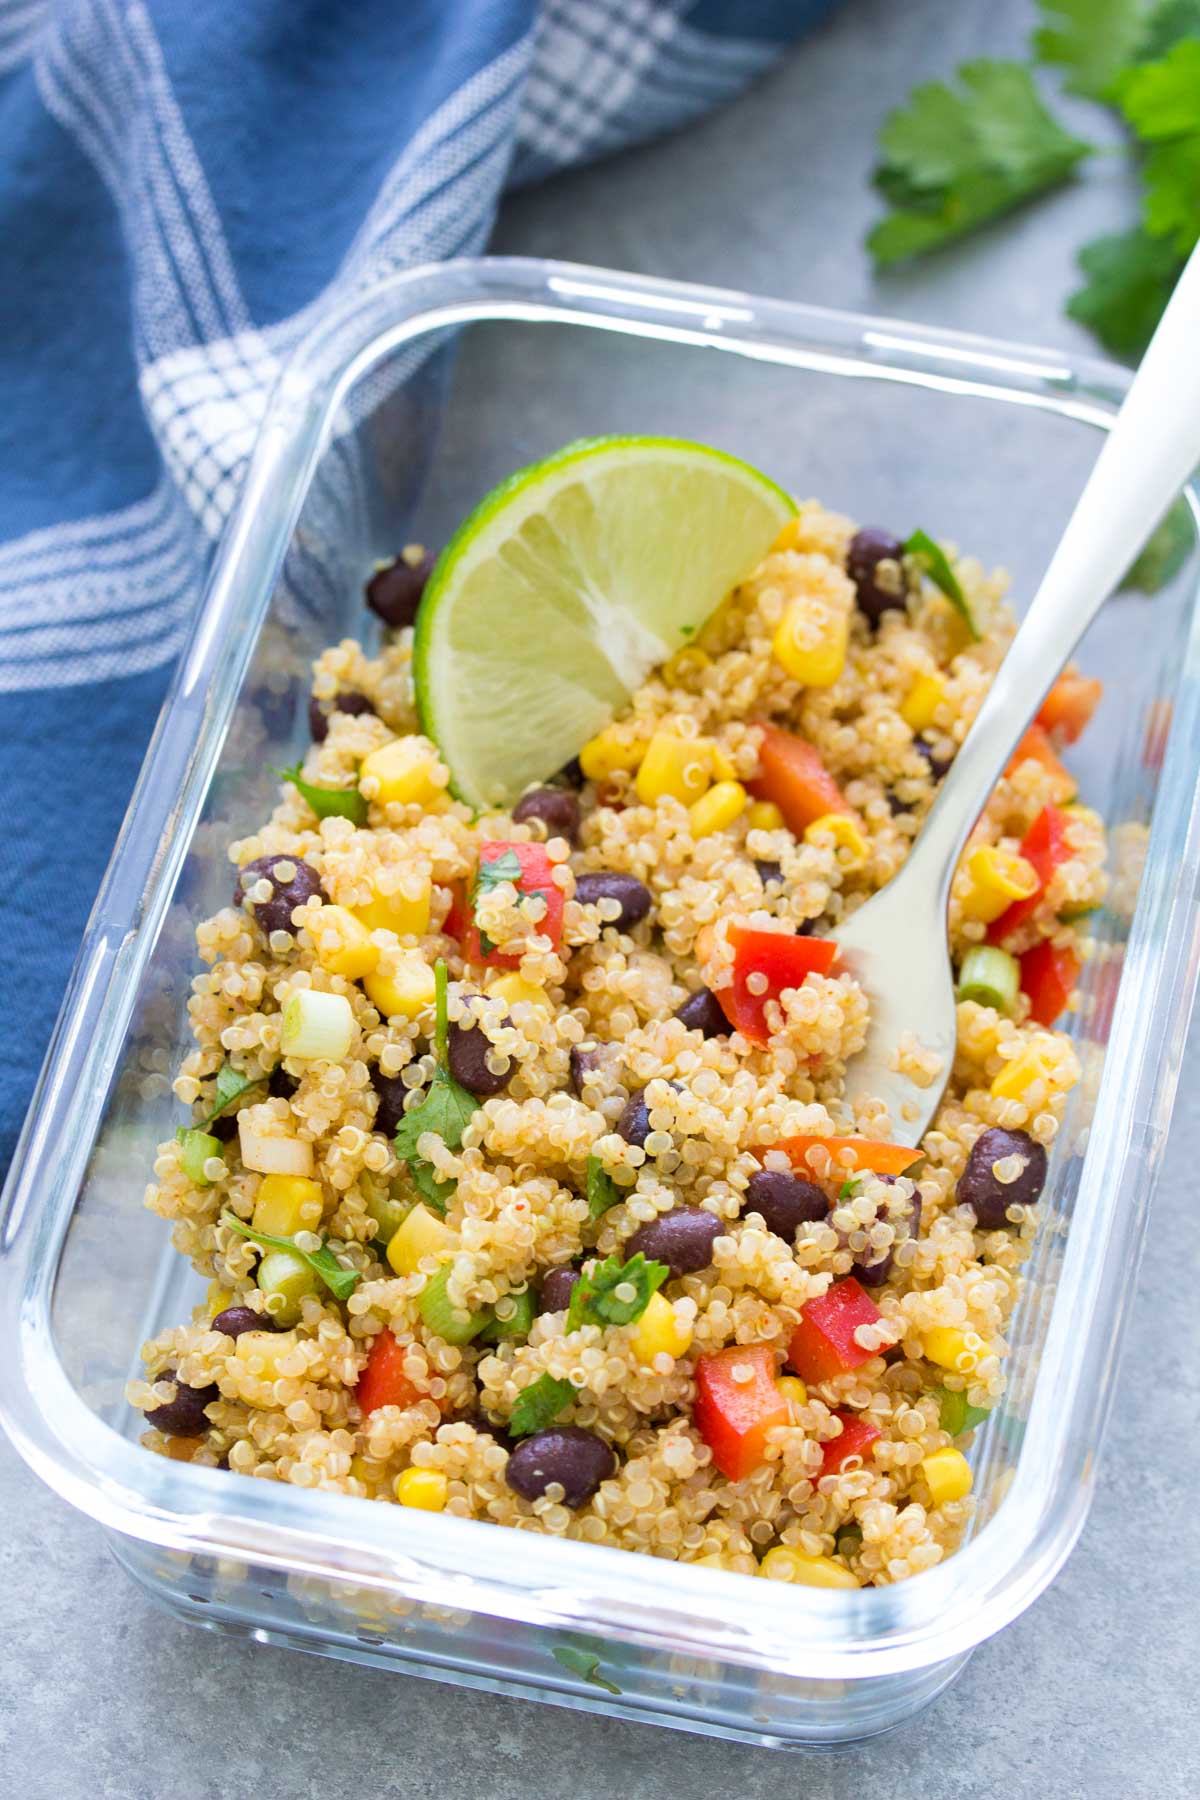 Quinoa salad in meal prep container with a fork.